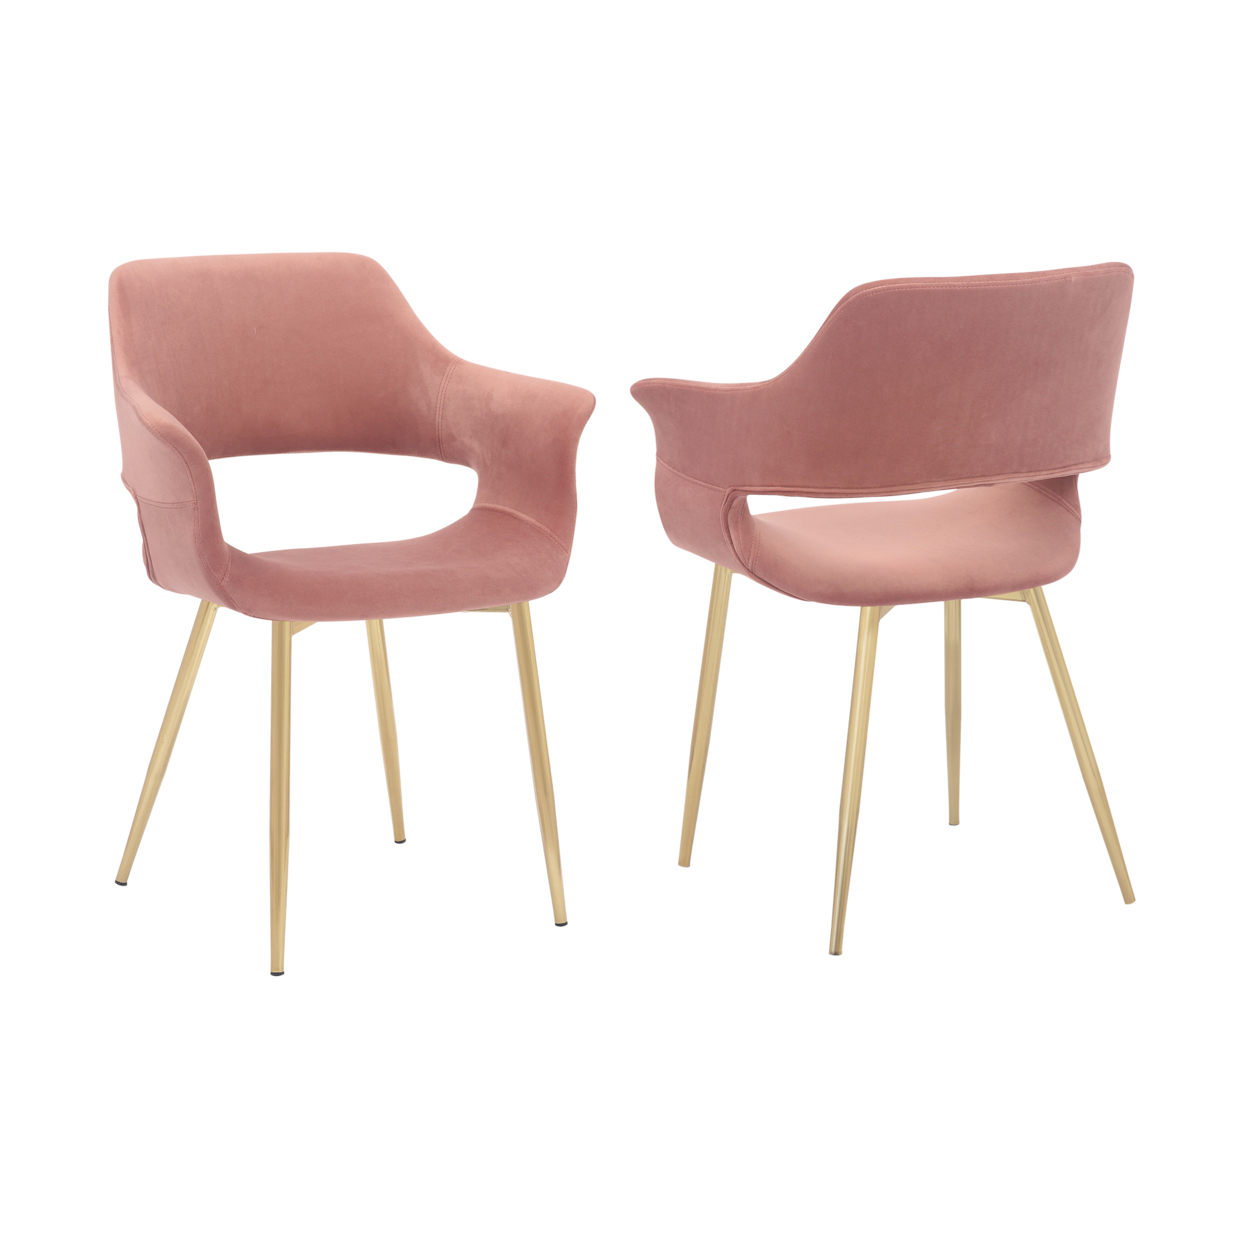 Dining Chair With Flared Curved Arms And Angled Metal Legs, Set Of 2, Pink- Saltoro Sherpi